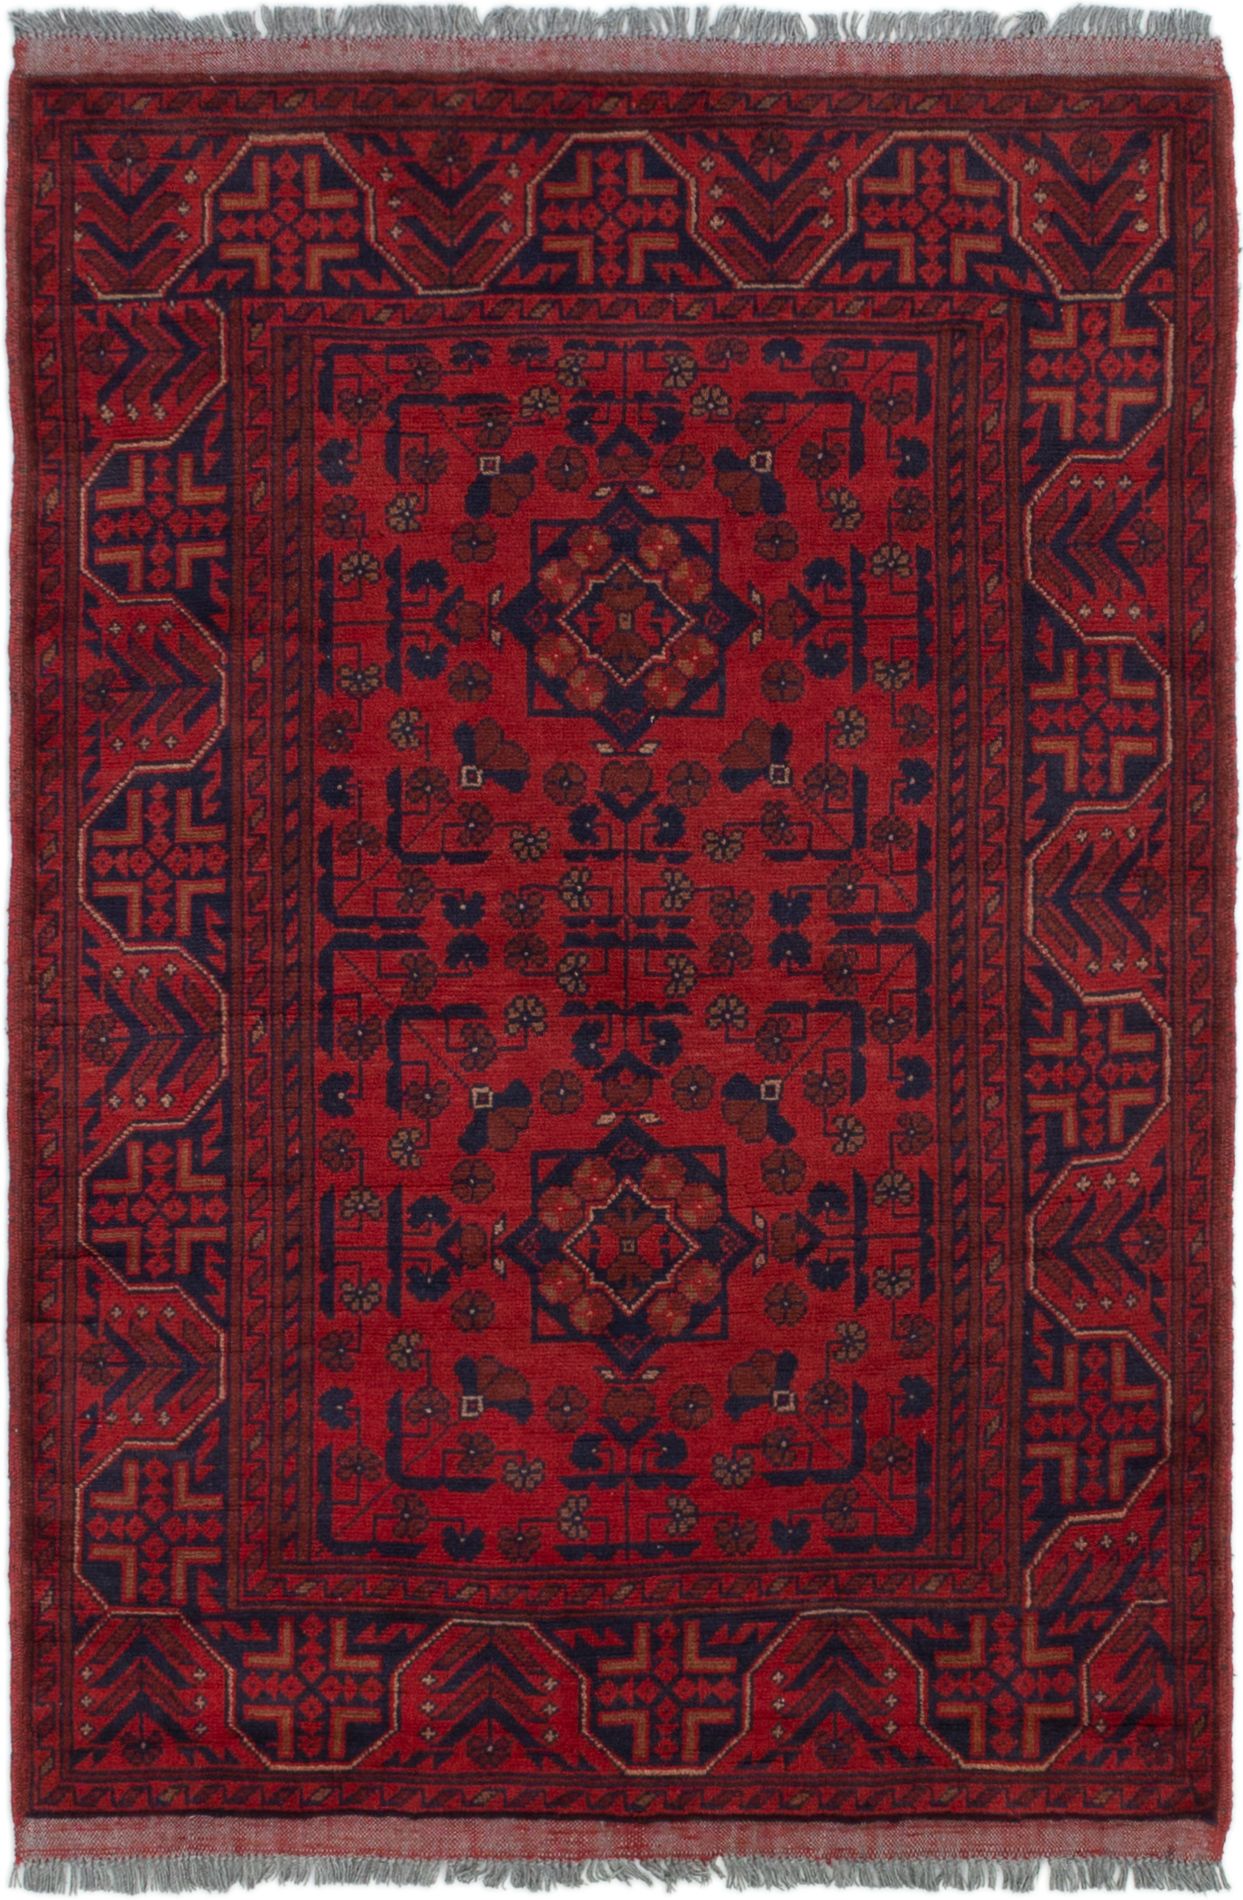 Hand-knotted Finest Khal Mohammadi Red Wool Rug 3'3" x 4'11" (38) Size: 3'3" x 4'11"  